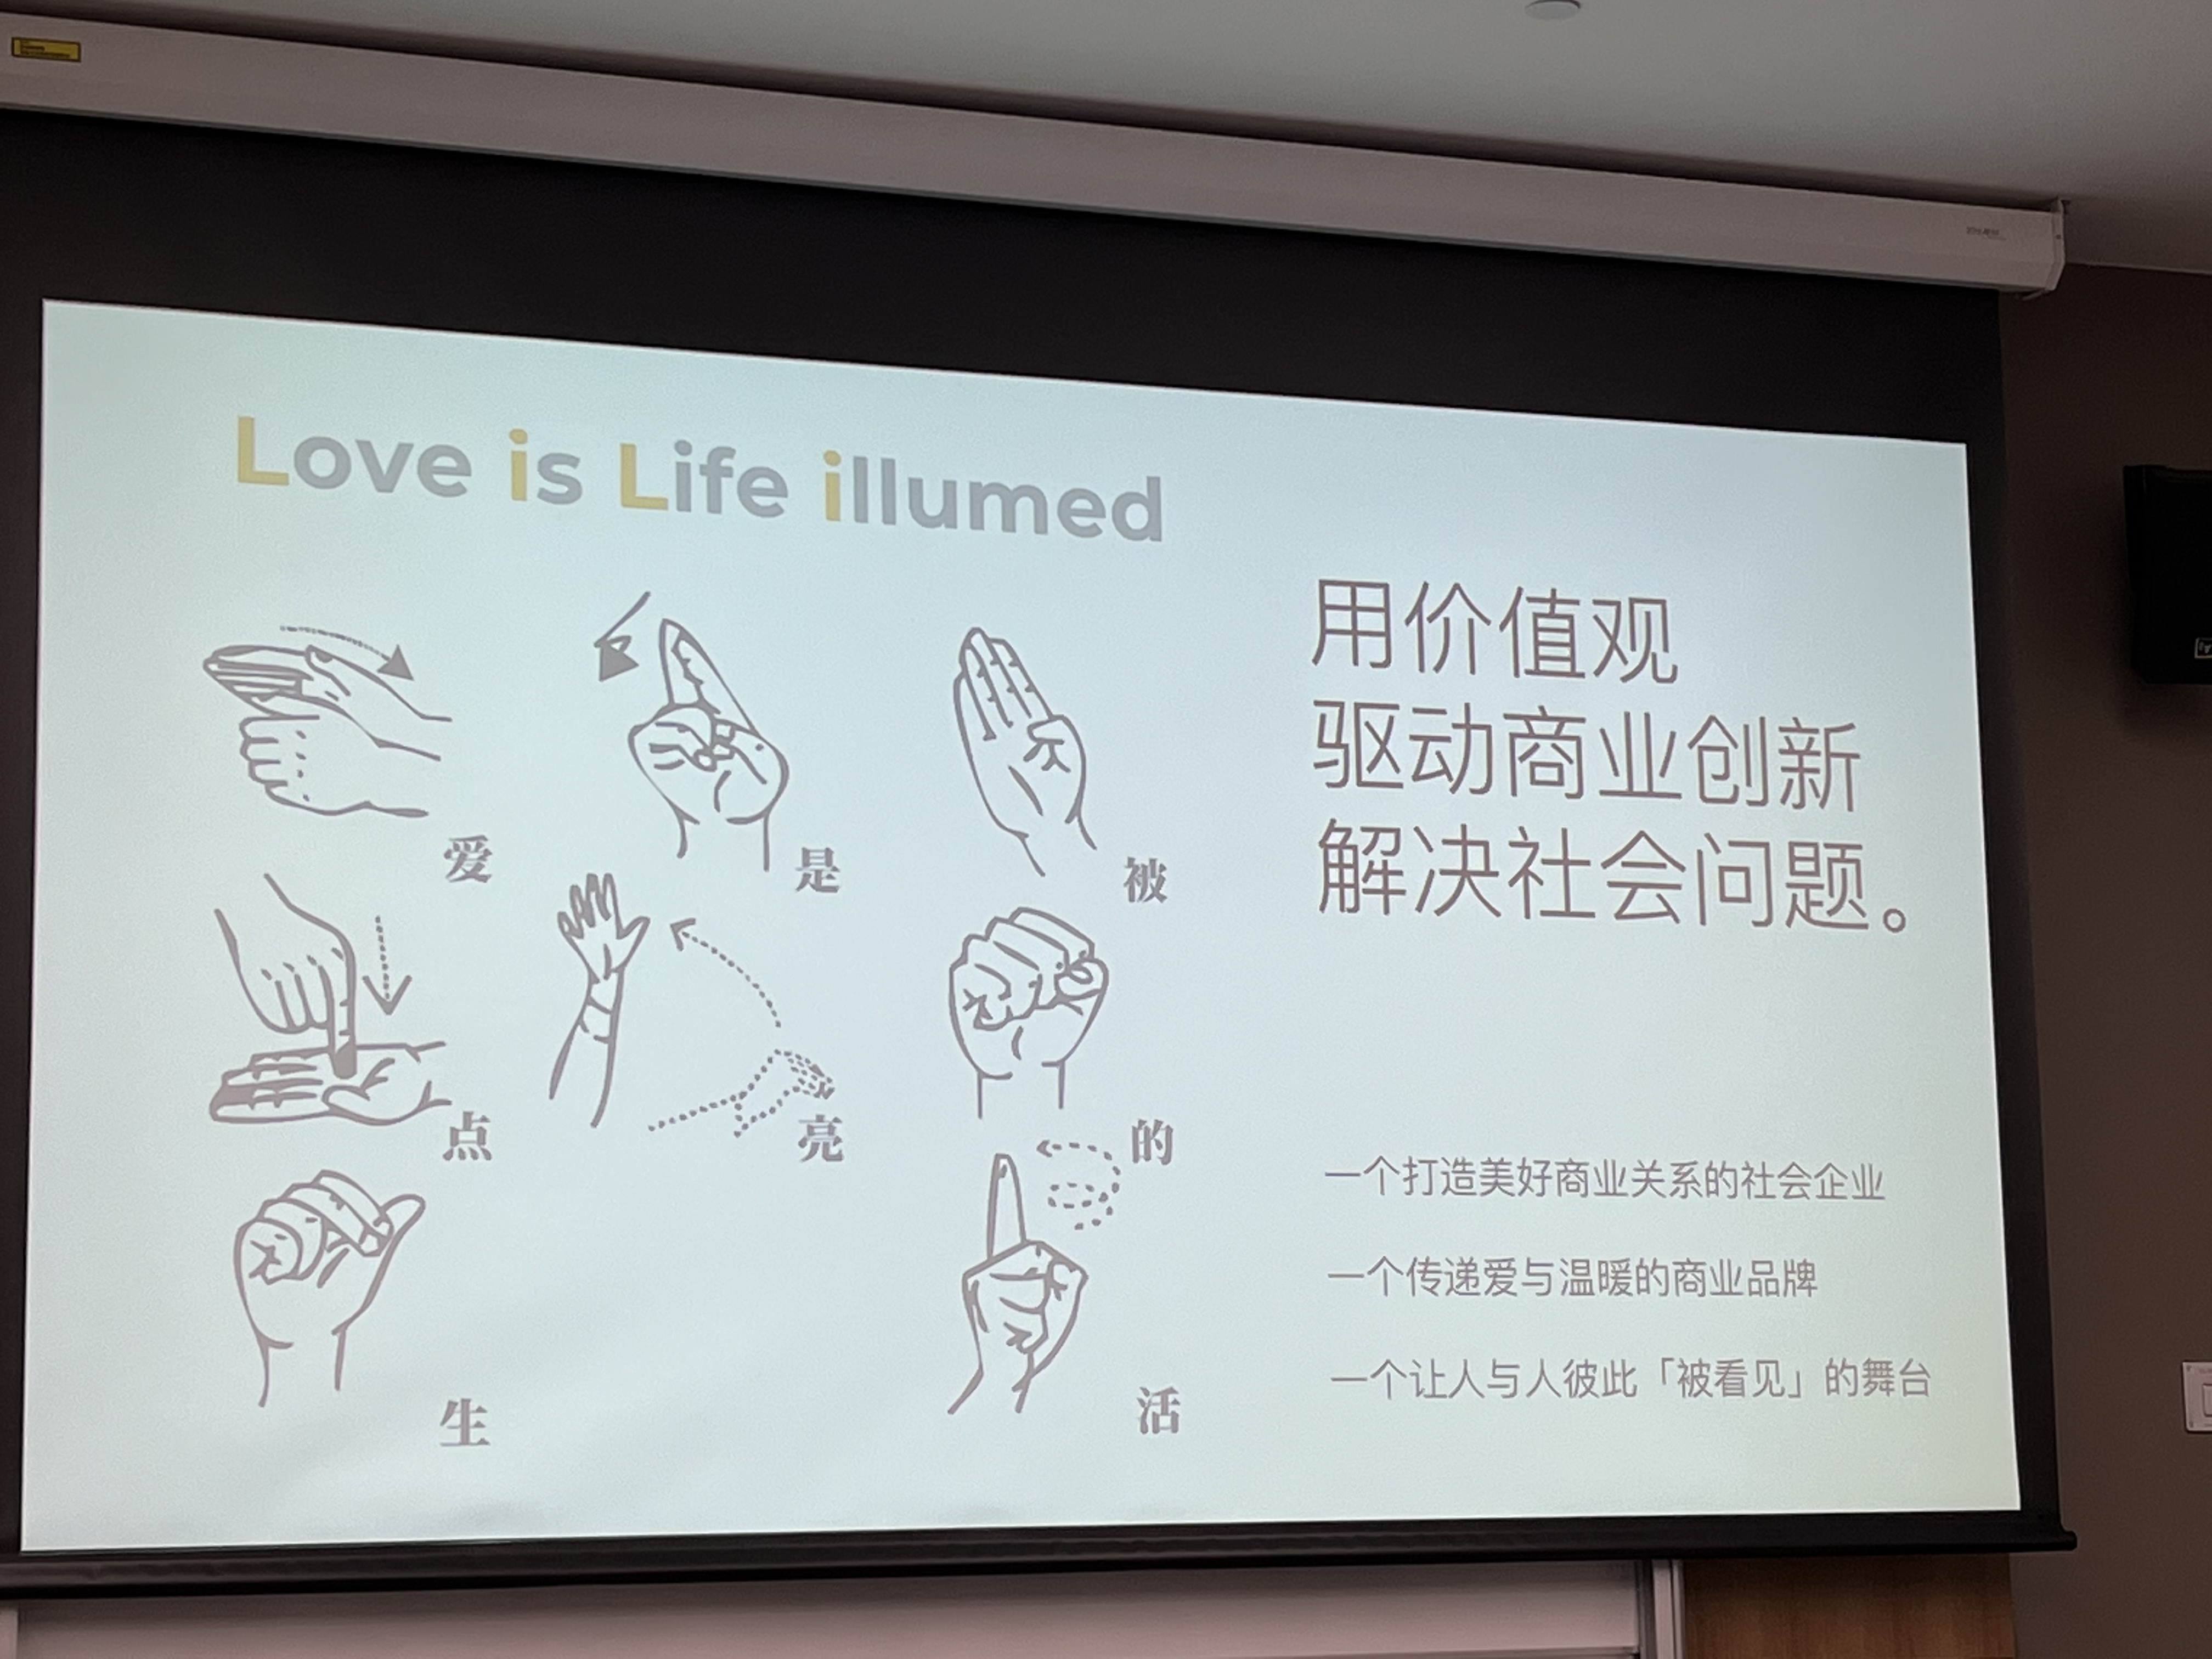 A diagram displaying how to sign "Love is life" in Chinese